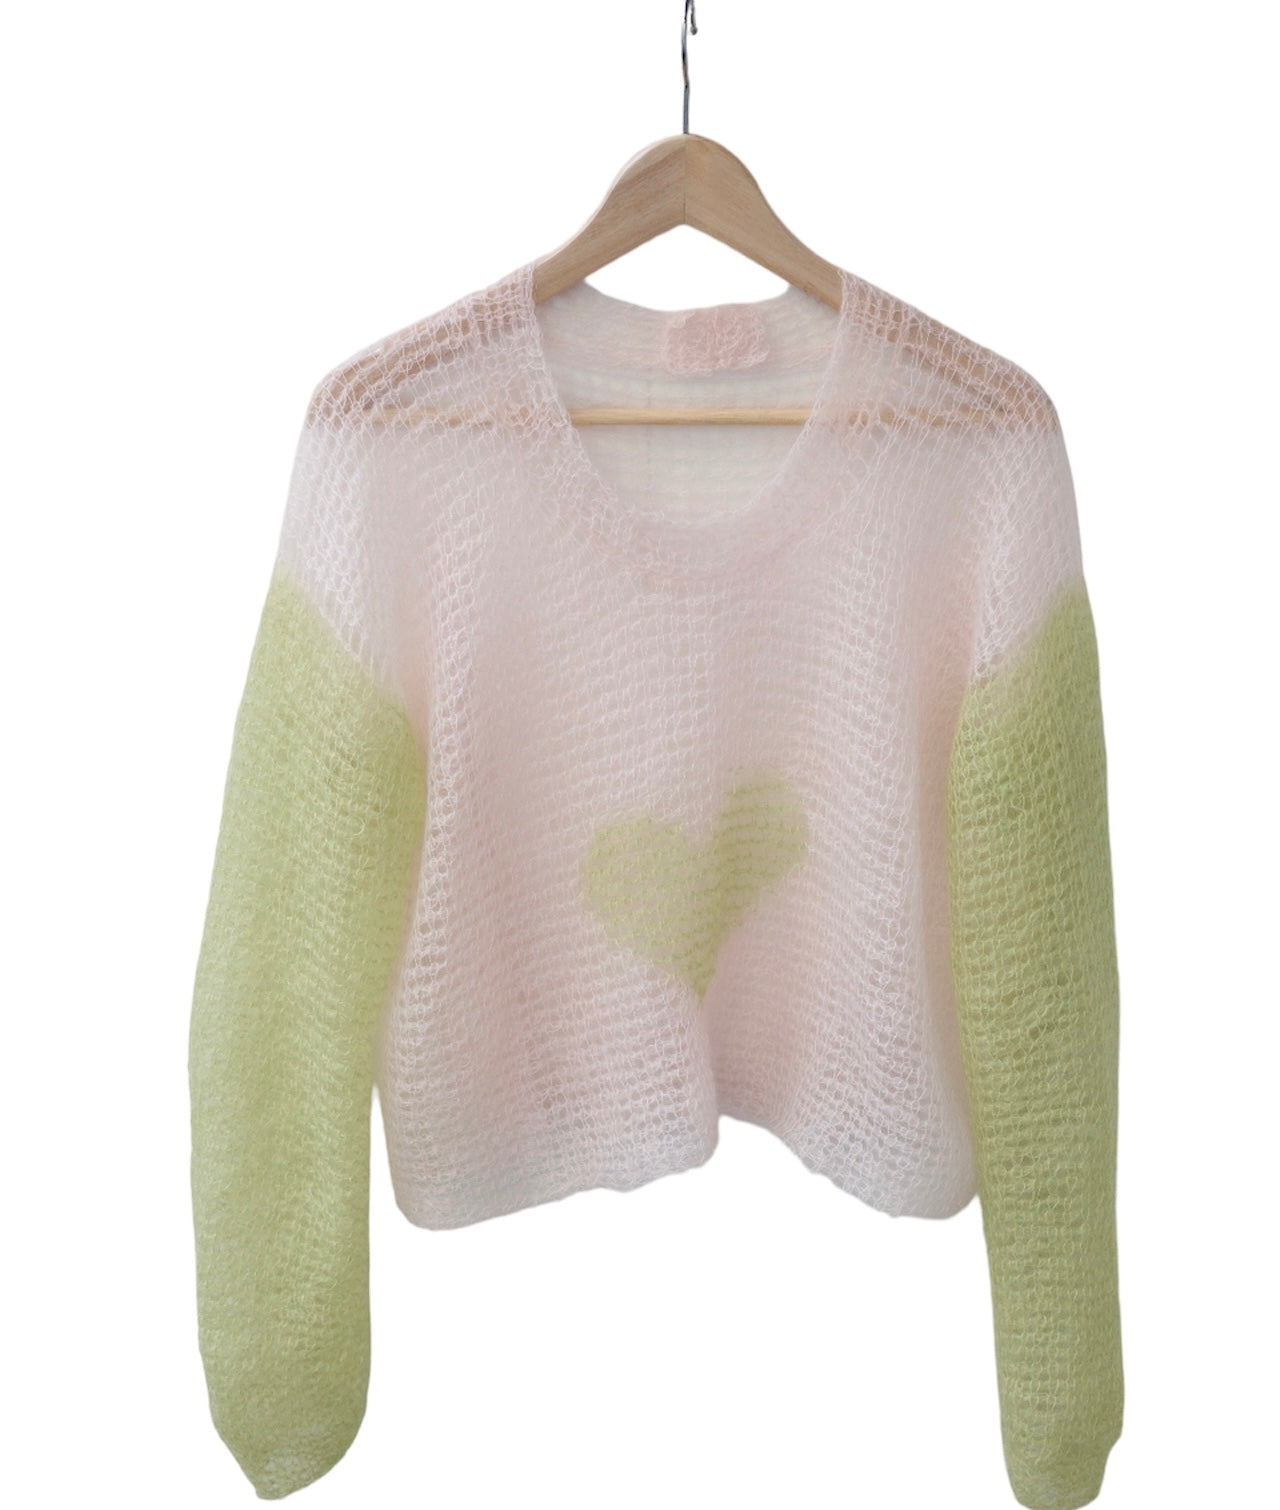 "The Heart" Sweater